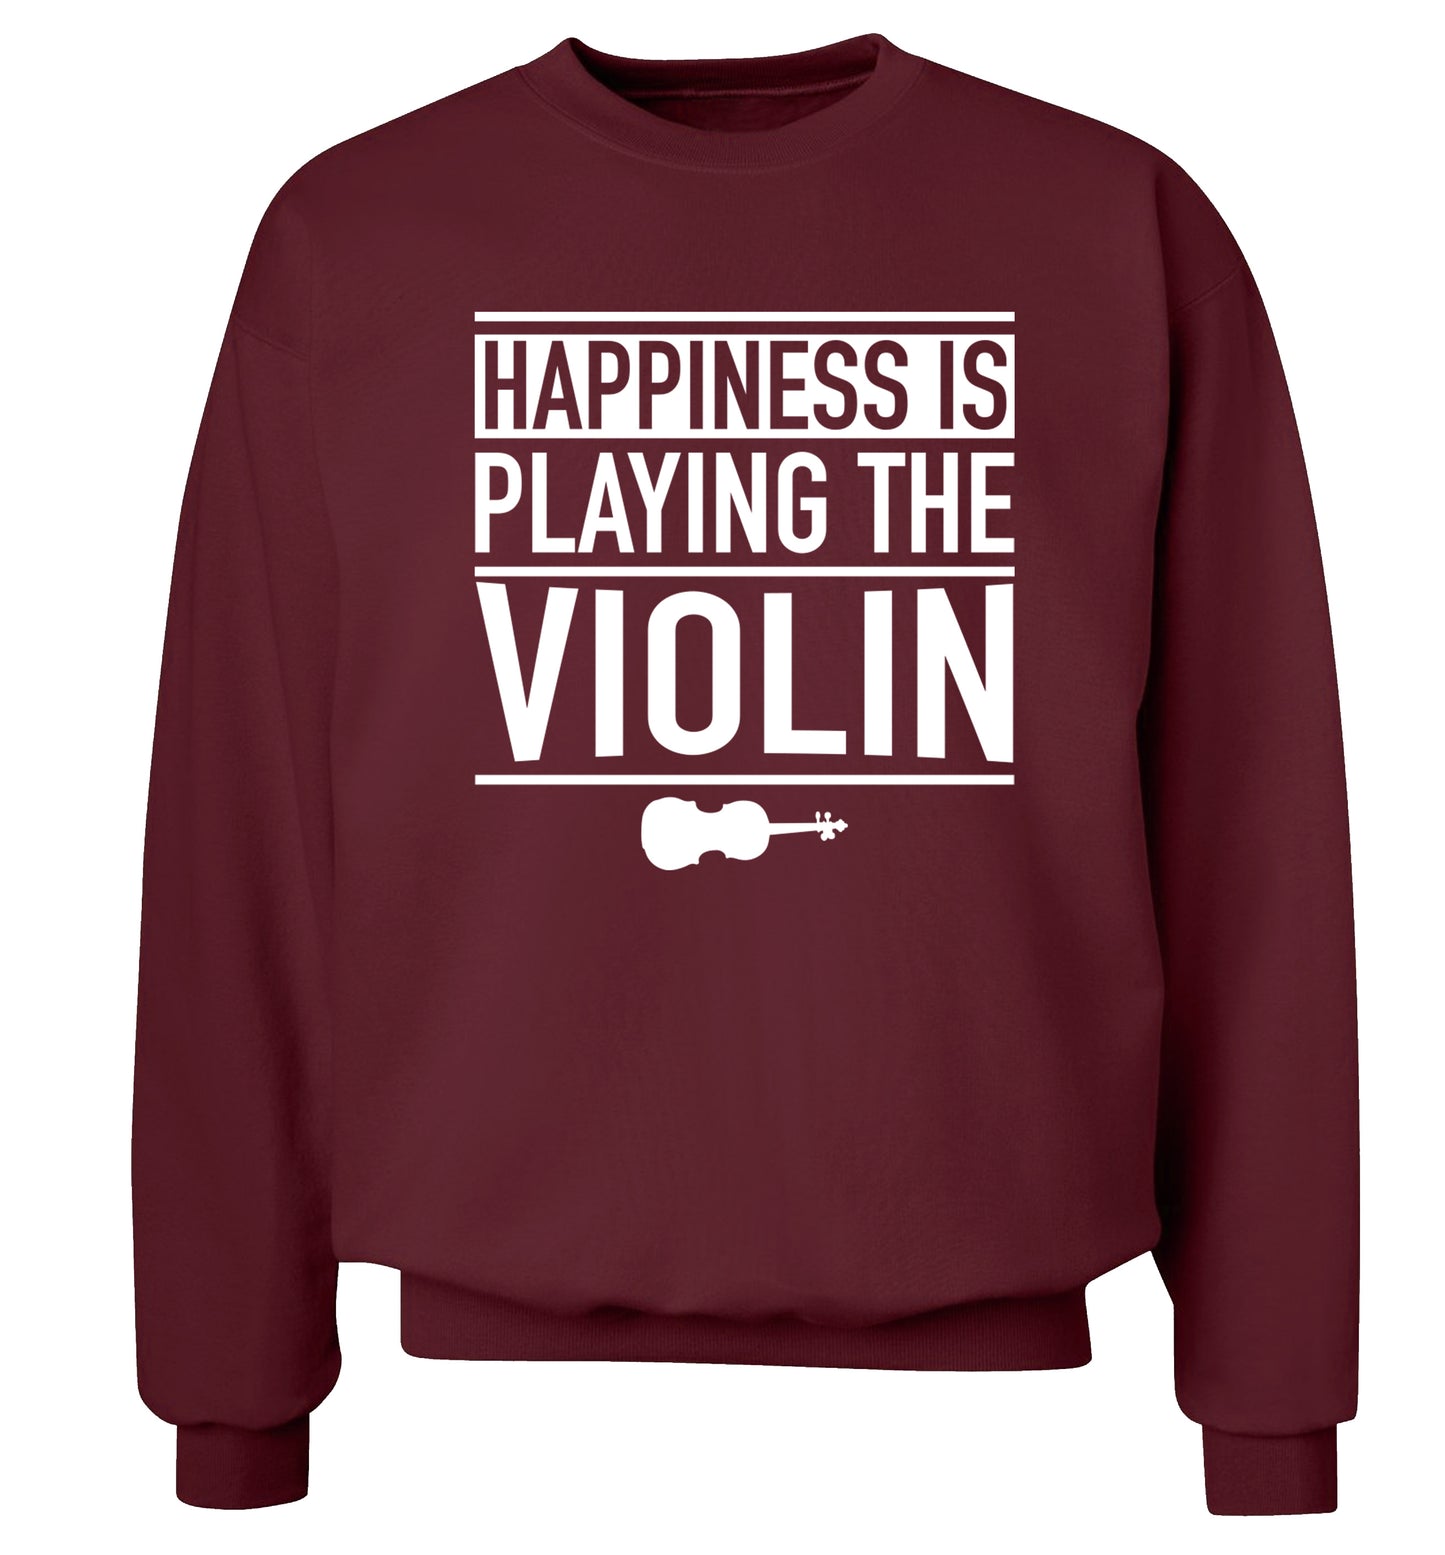 Happiness is playing the violin Adult's unisex maroon Sweater 2XL